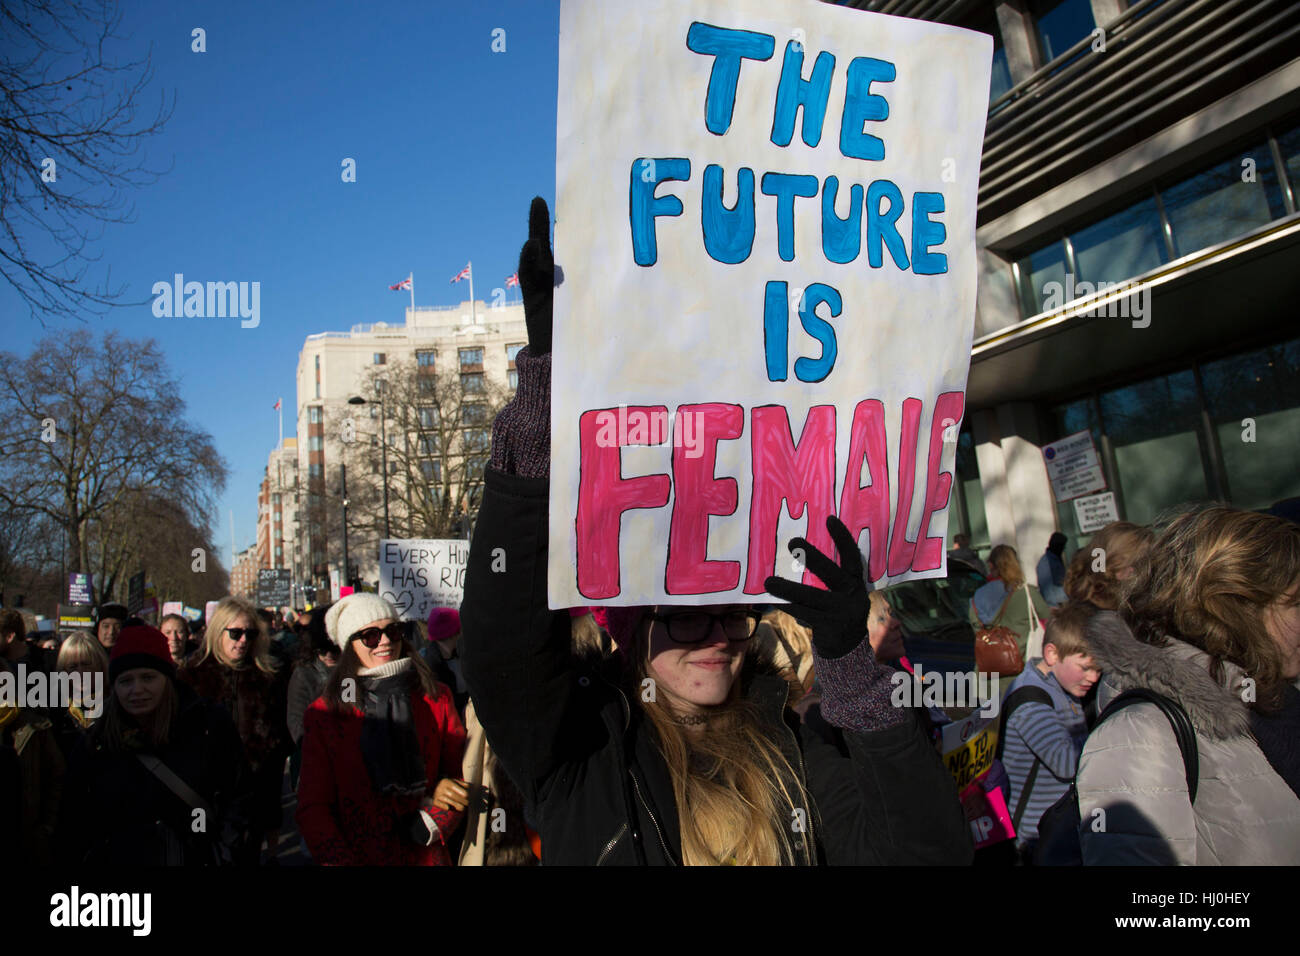 London, UK. 21st January, 2017. Women’s March on London to coincide with the first day of Donald Trump’s Presidency on January 21st 2017 in London, United Kingdom. Women-led marches, welcoming all participants, took place across the world, as people of all genders marched in London as part of an international day of action in solidarity. The march, was for the protection of fundamental rights and for the safeguarding of freedoms threatened by recent political events. Credit: Michael Kemp/Alamy Live News Stock Photo